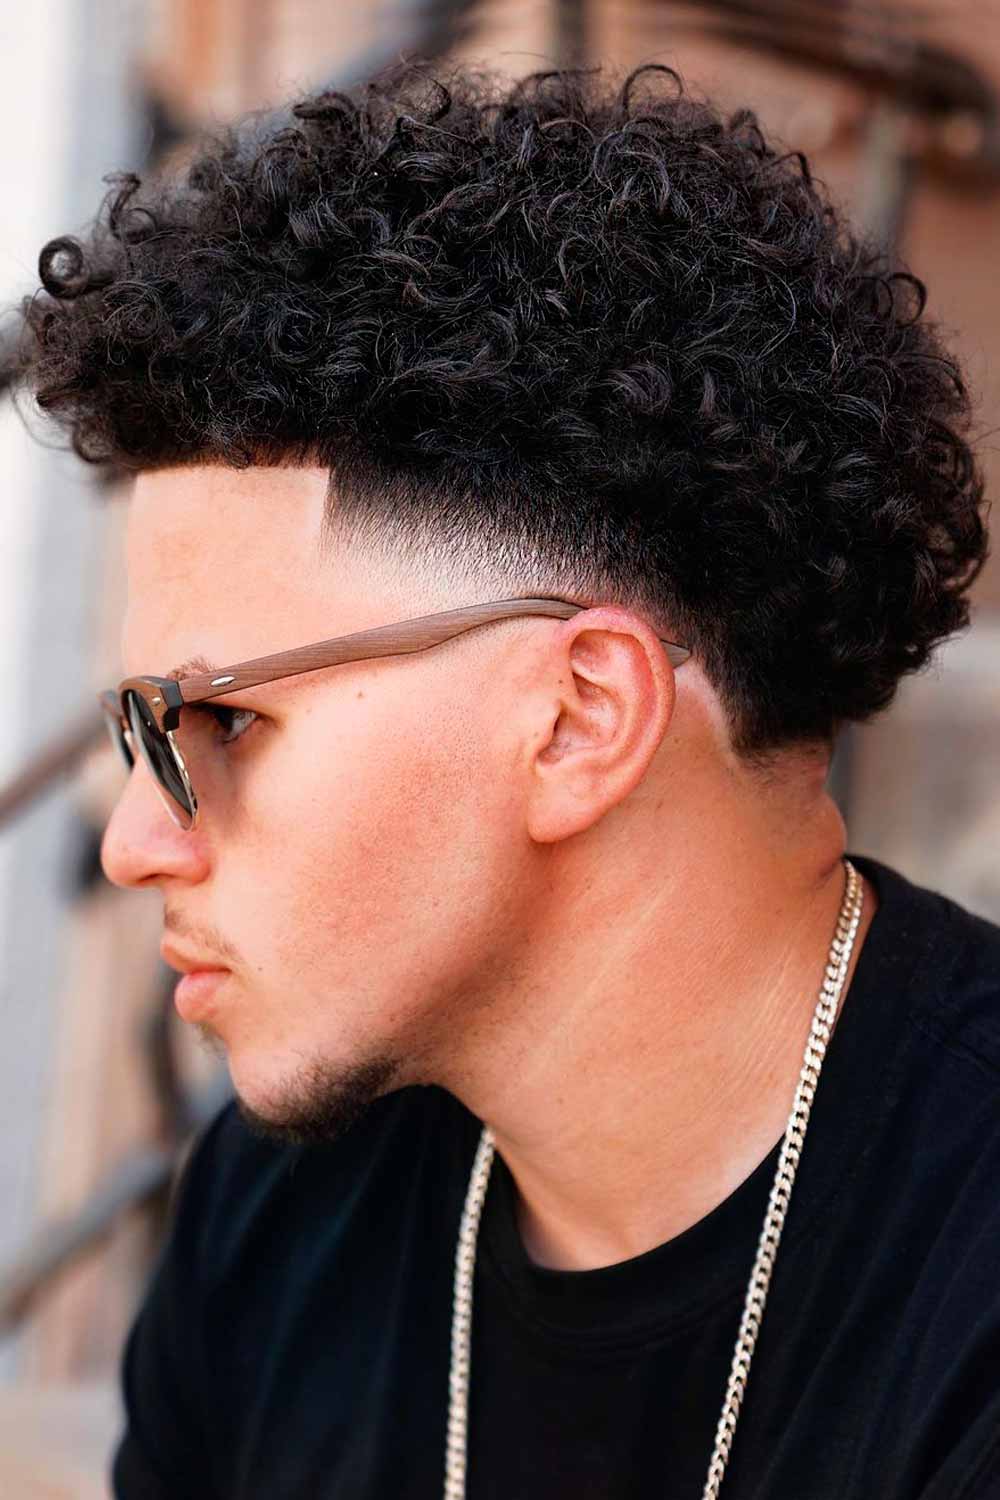 Blowout Taper Fade Curly Hair #taperfadecurlyhair #taperfade #curlyhair #taper #fade